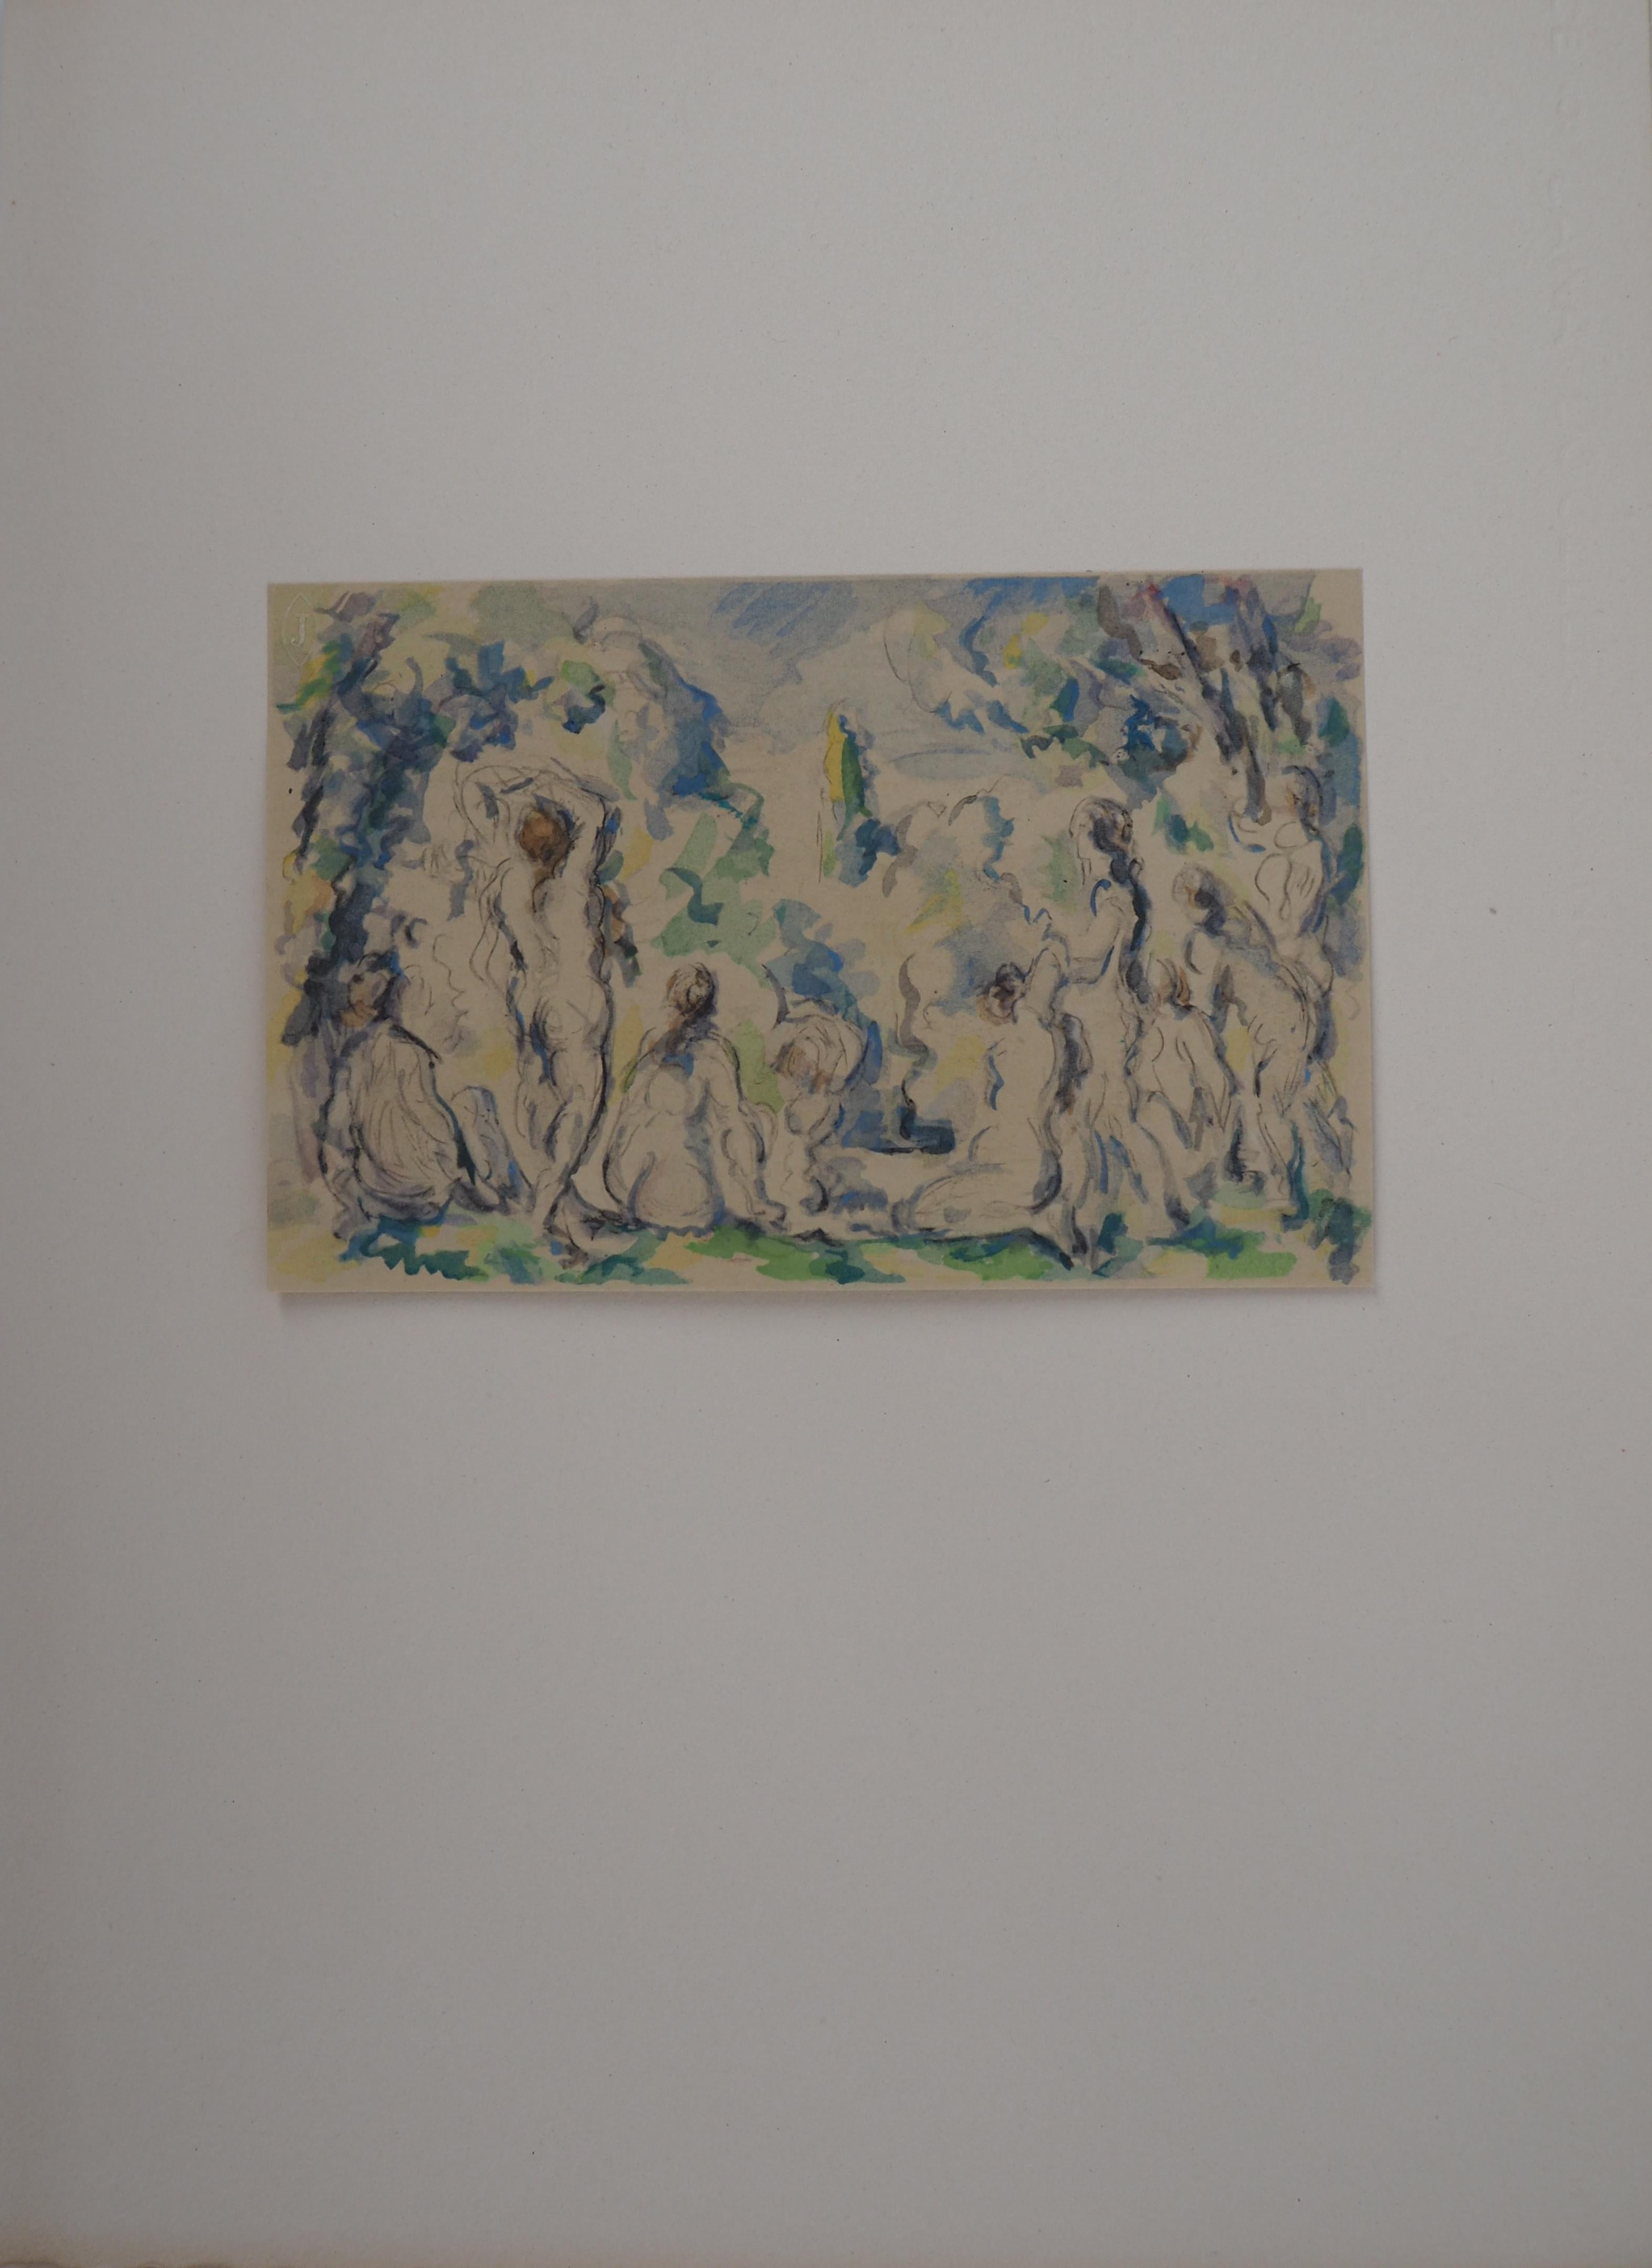 Eight Nude Bathers in a Landscape - Lithograph and Stencil Watercolor, 1947 - Print by After Paul Cezanne